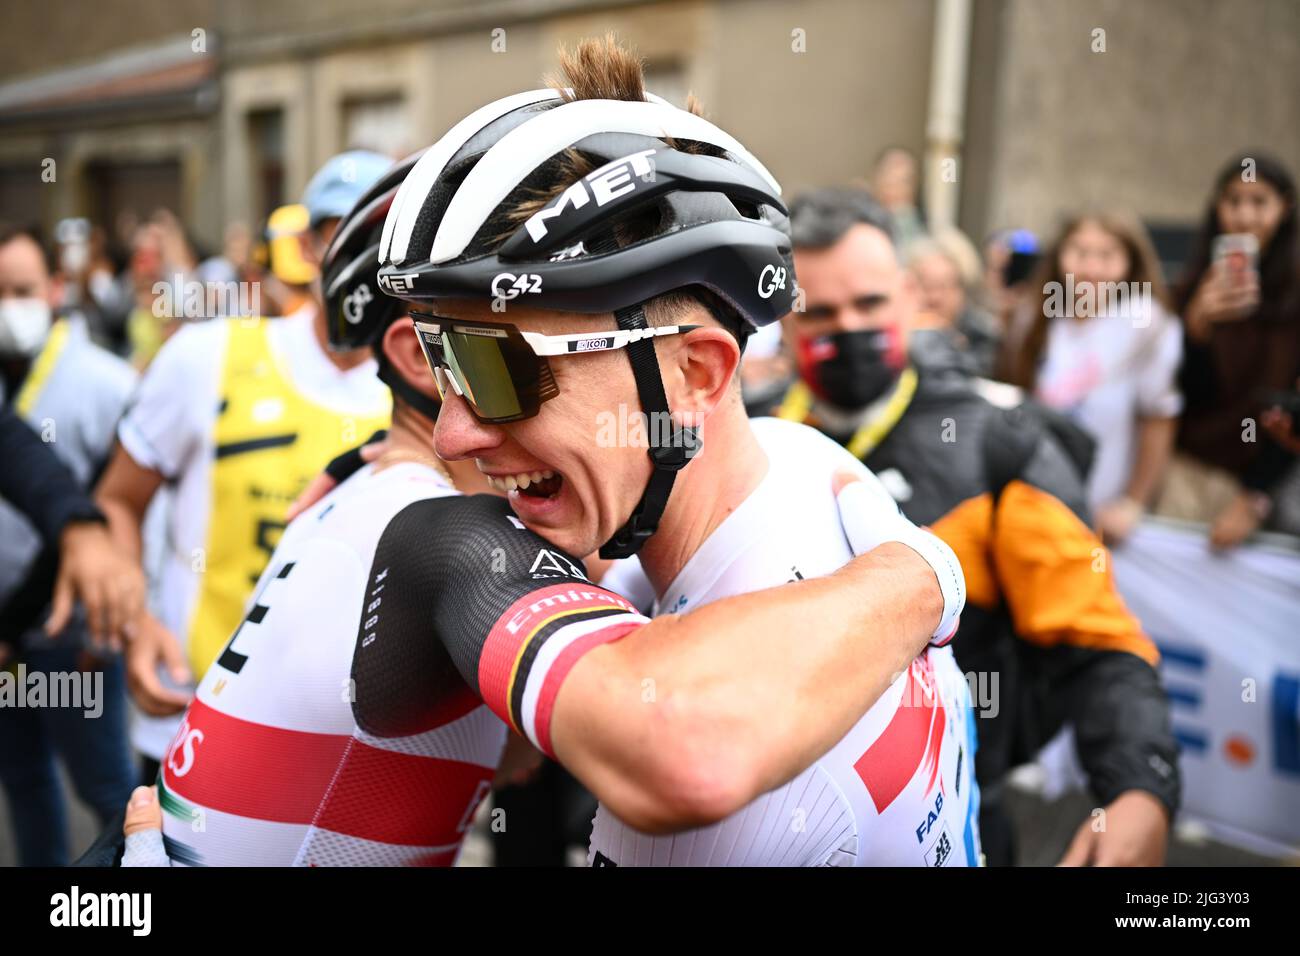 Tadej Pogacar of Slovenia and UAE Team Emirates celebrates after winning during Stage 6 of the Tour De France, Binche to Longwy, on Thursday 7th July 2022 Photo credit should read: JJ/POOL/Godingimages Credit: Peter Goding/Alamy Live News Stock Photo